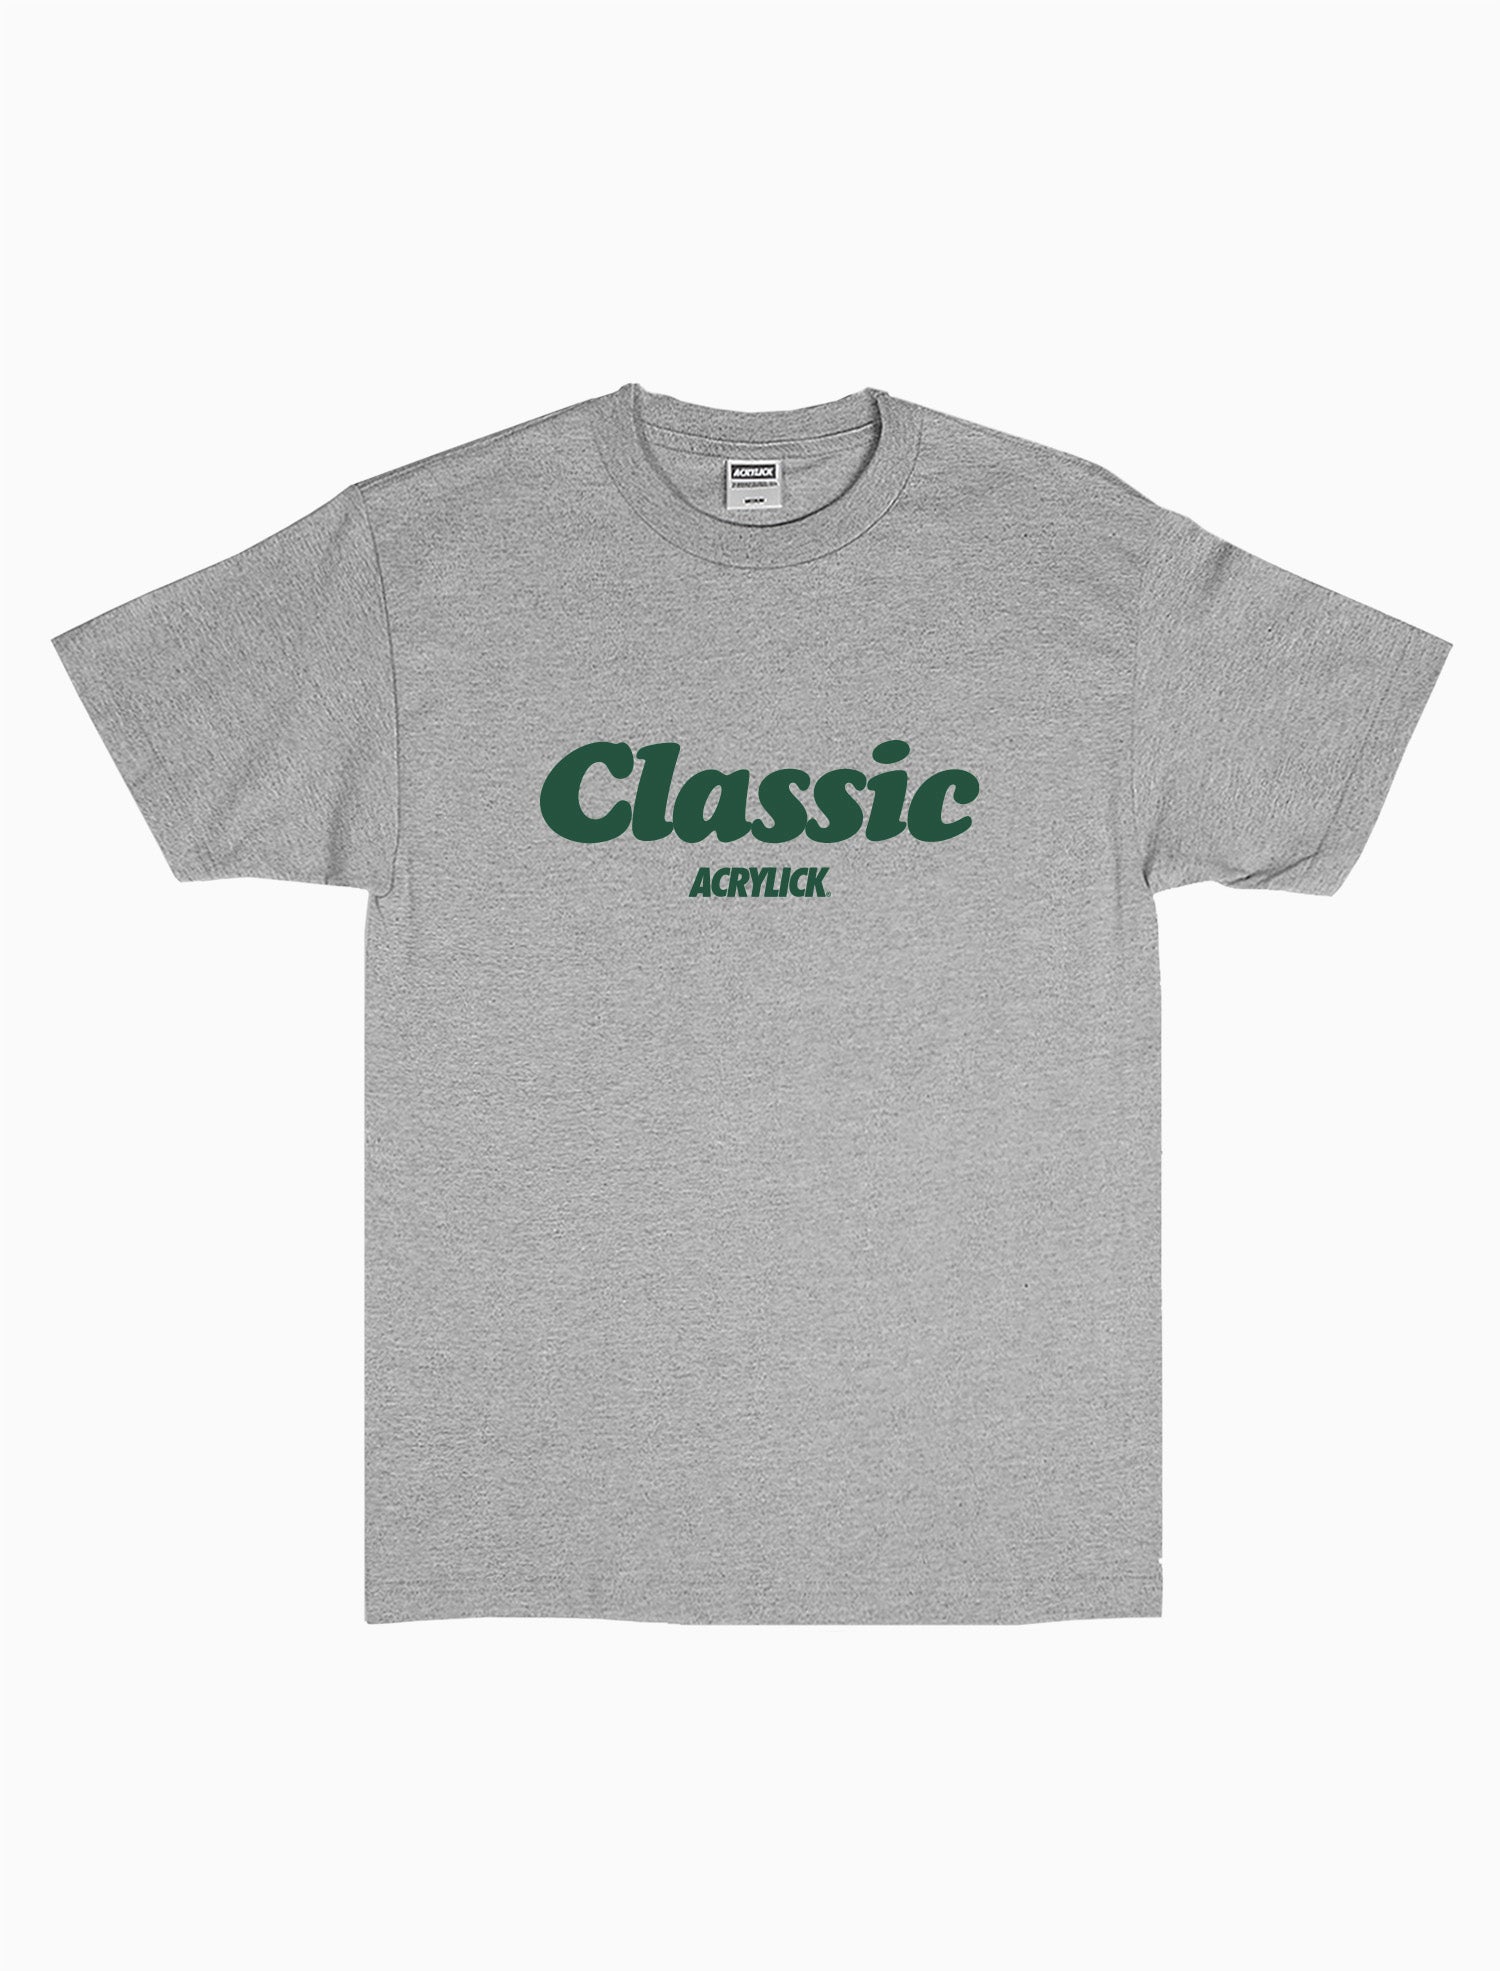 Acrylick Classic Technique Tee includes a front and rear print. Available in Heather Grey and Black.